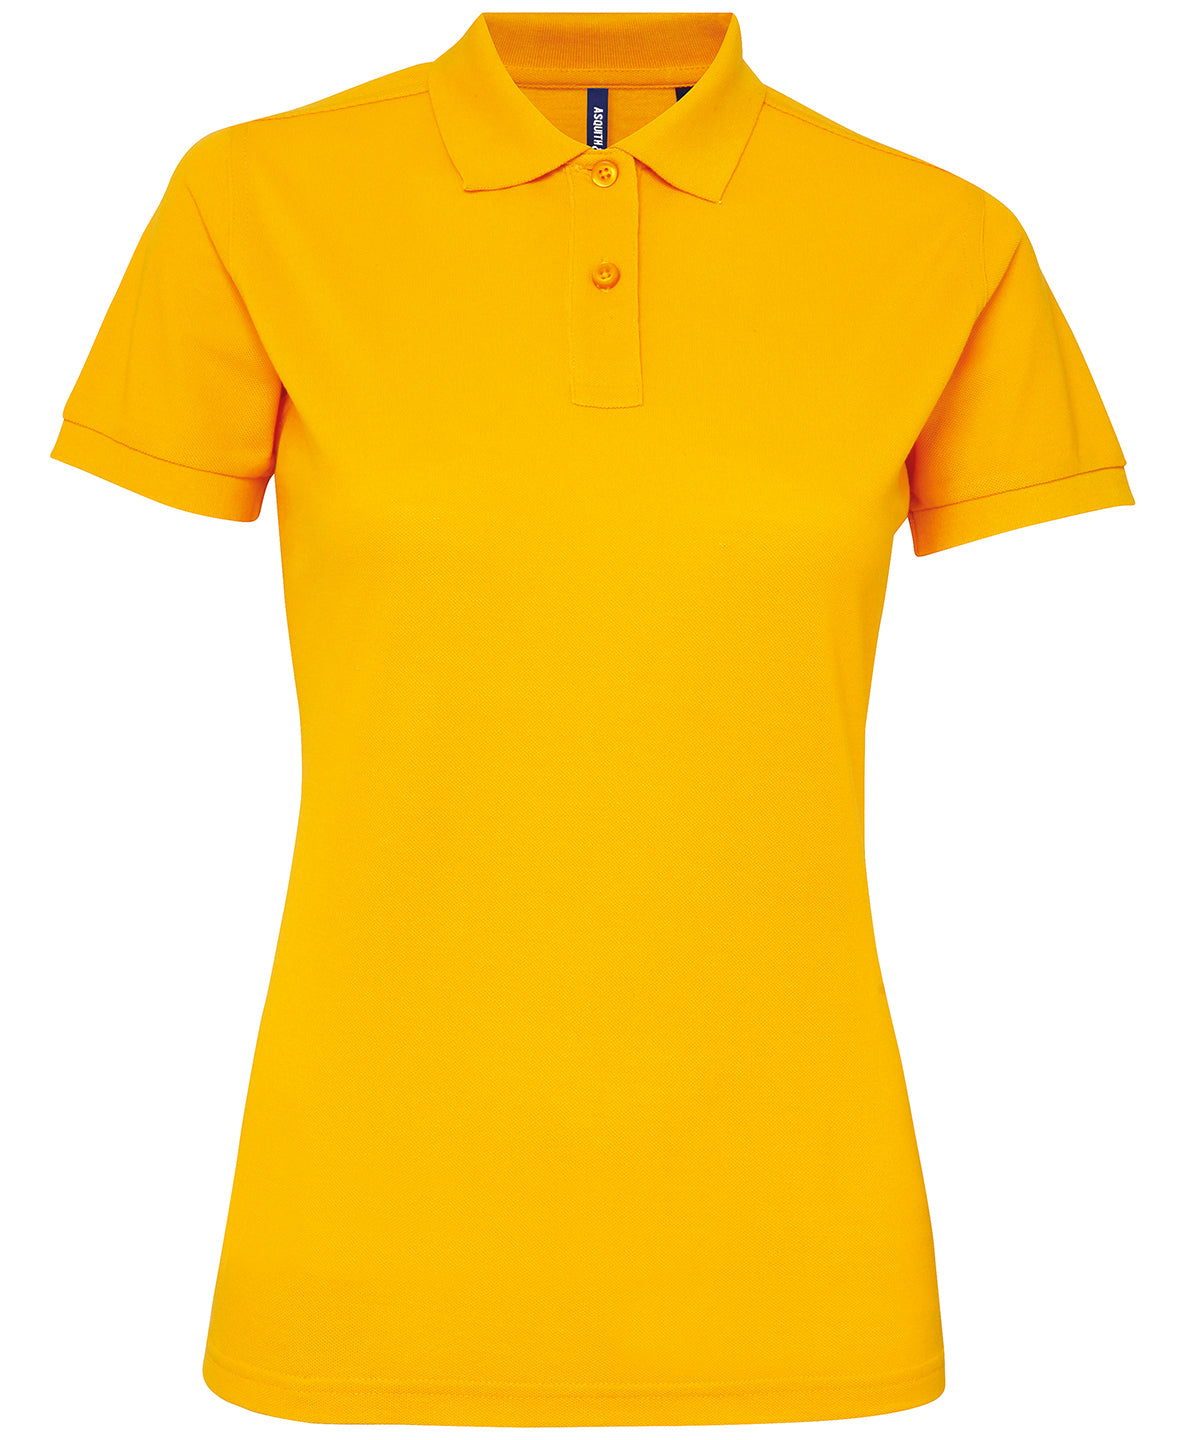 Personalised Polo Shirts - Light Brown Asquith & Fox Women’s polycotton blend polo